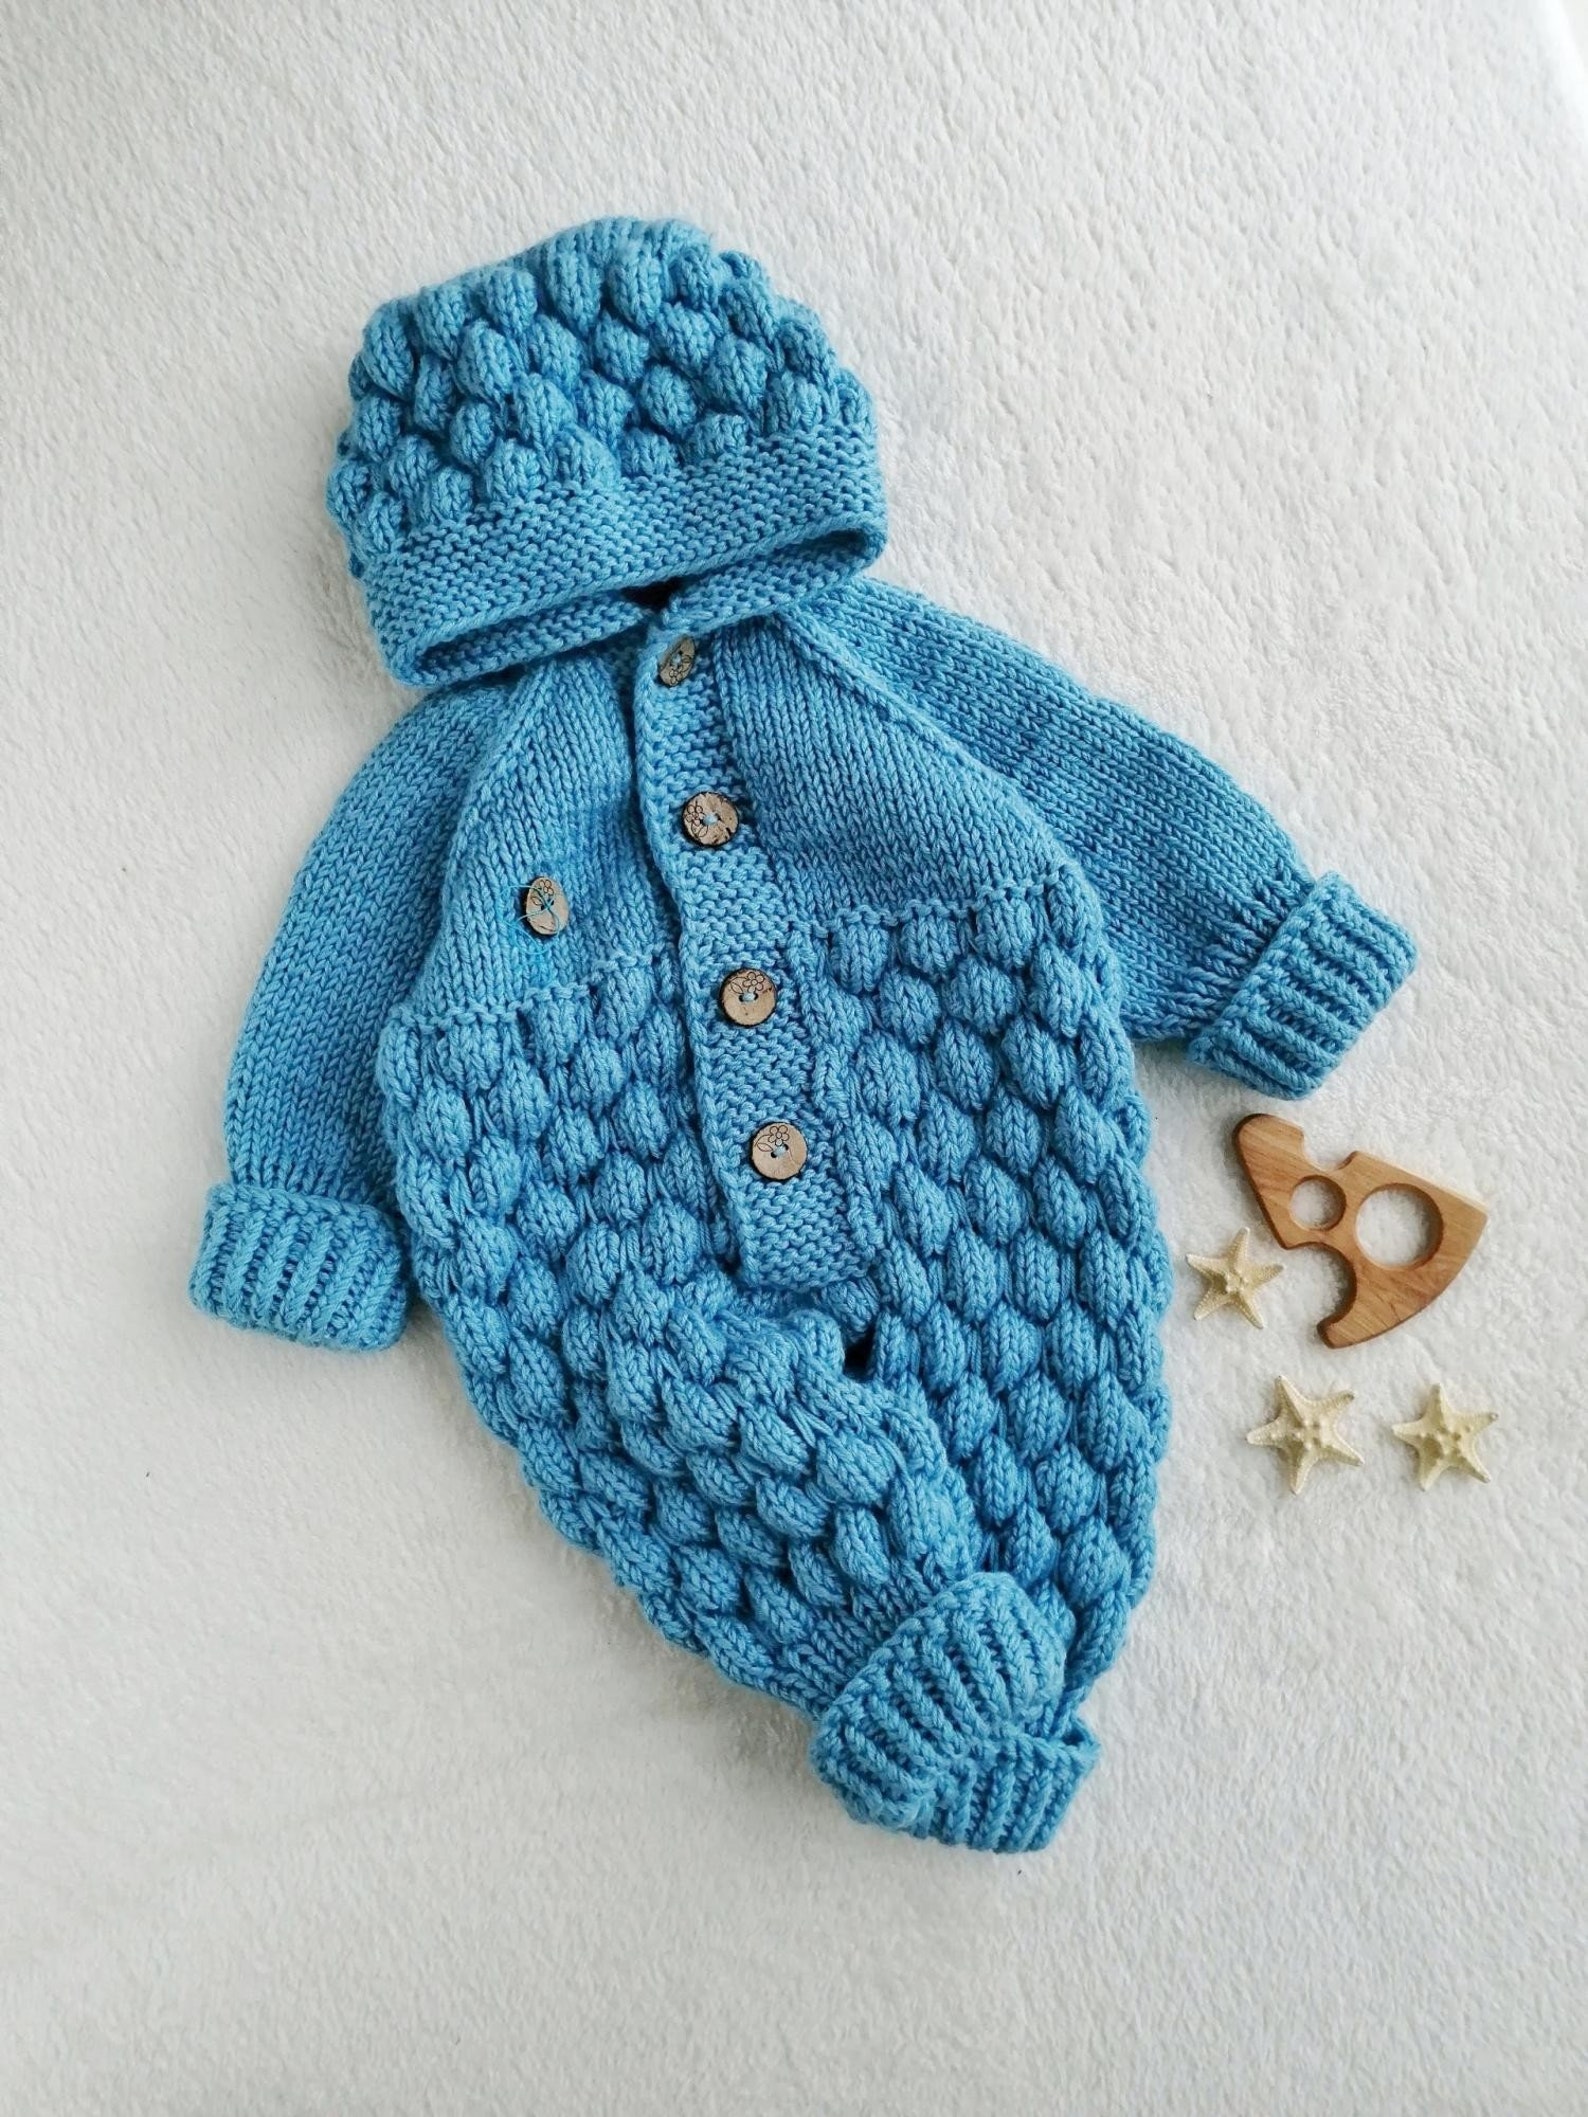 Blue knitted newborn jumpsuit for boy Fathers day gift Crochet | Etsy